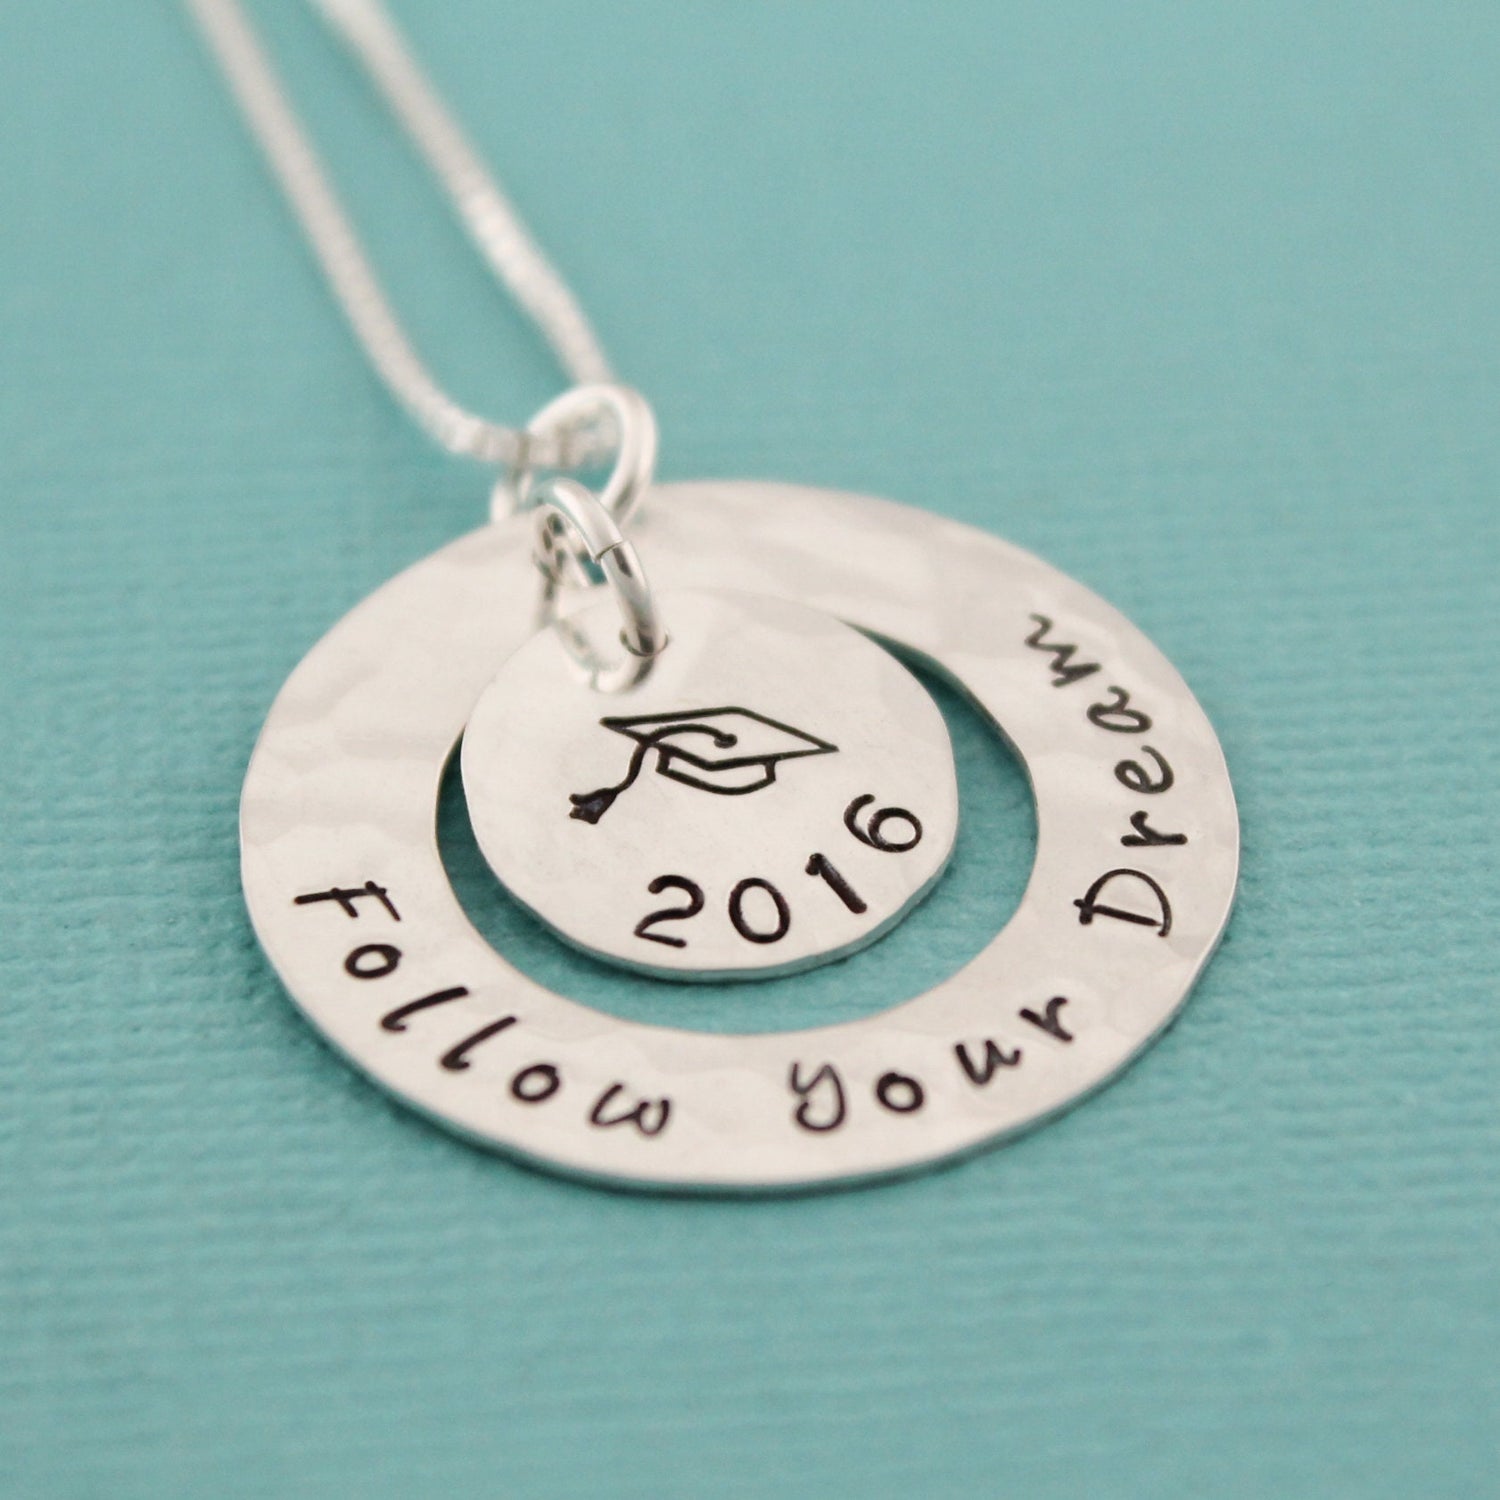 Follow Your Dream Necklace, Personalized Graduation Jewelry, Graduation Gift, Hand Stamped Necklace, Personalized Jewelry, Grad Jewelry